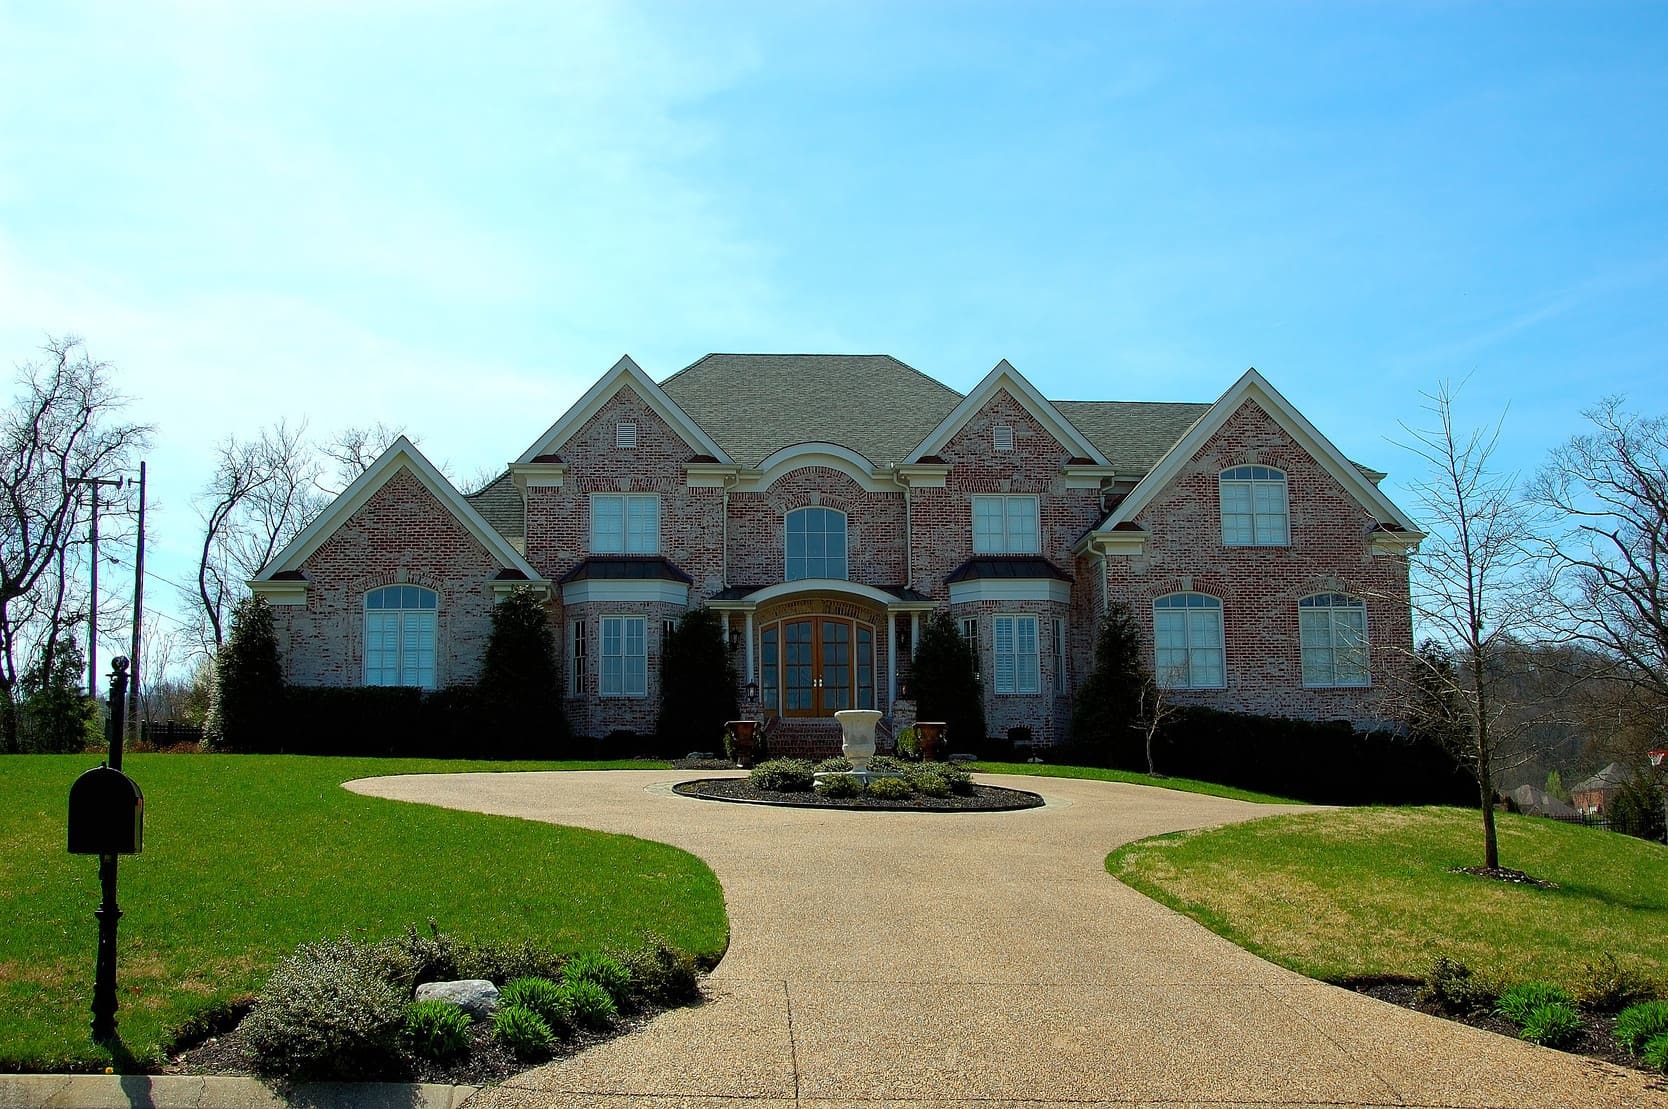 Large brick home typical of West Knoxville, Tennessee